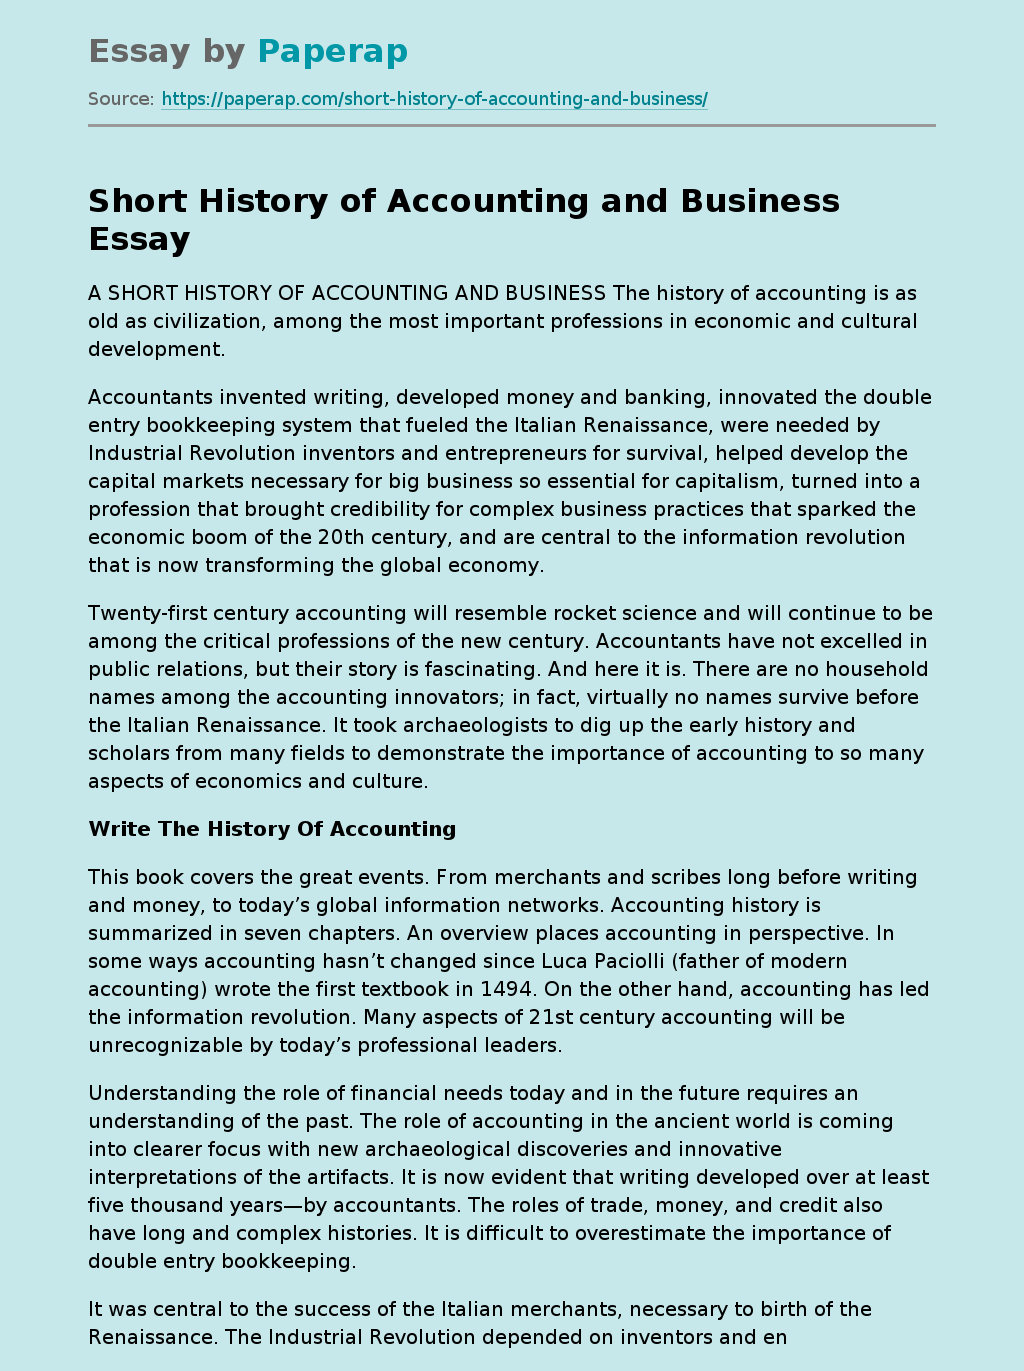 Short History of Accounting and Business